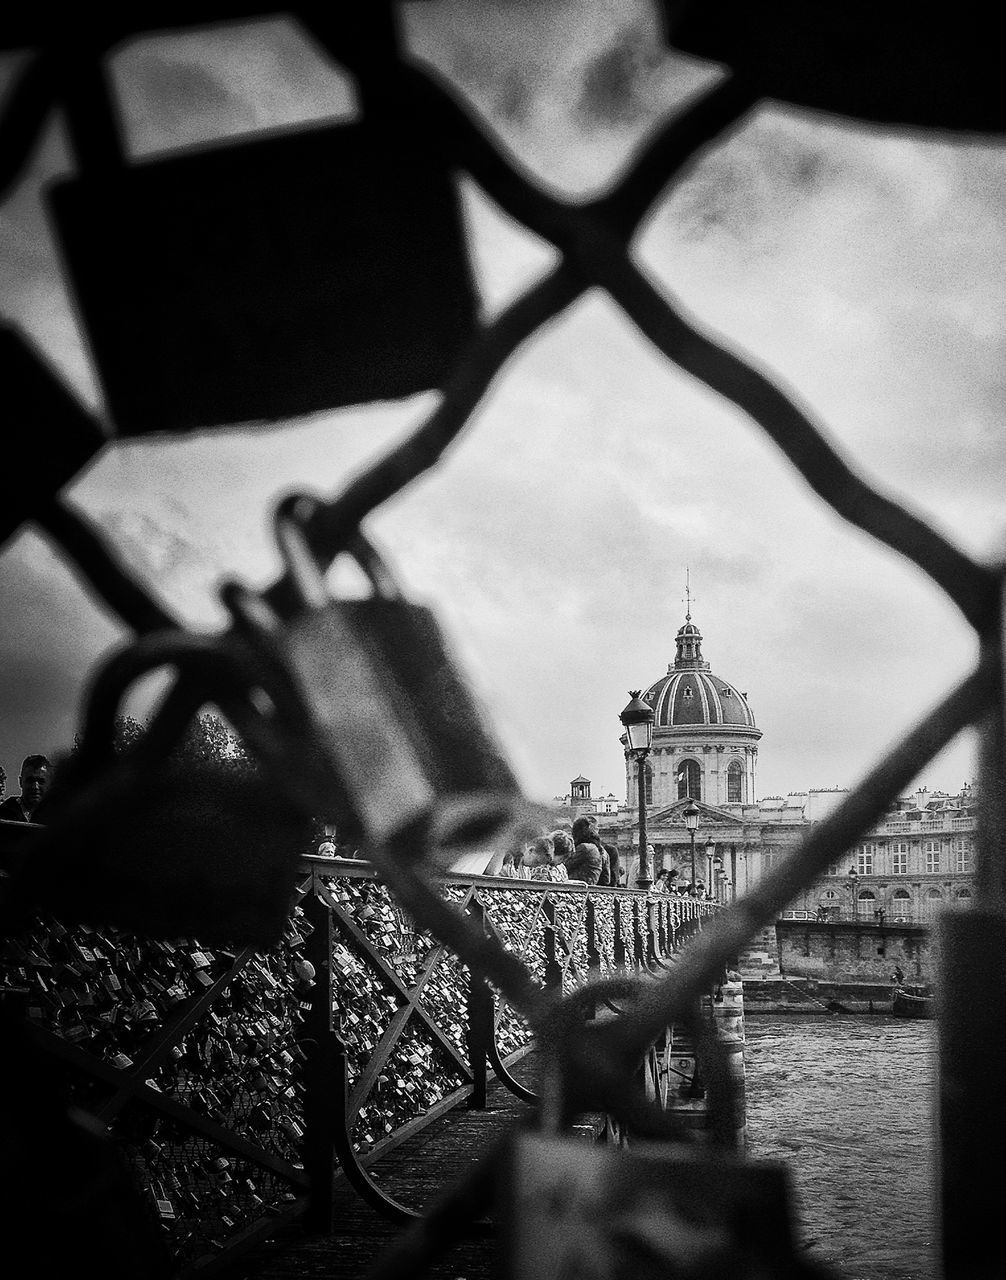 architecture, built structure, building exterior, religion, place of worship, railing, spirituality, sky, church, selective focus, focus on foreground, gate, outdoors, sunlight, day, focus on background, no people, history